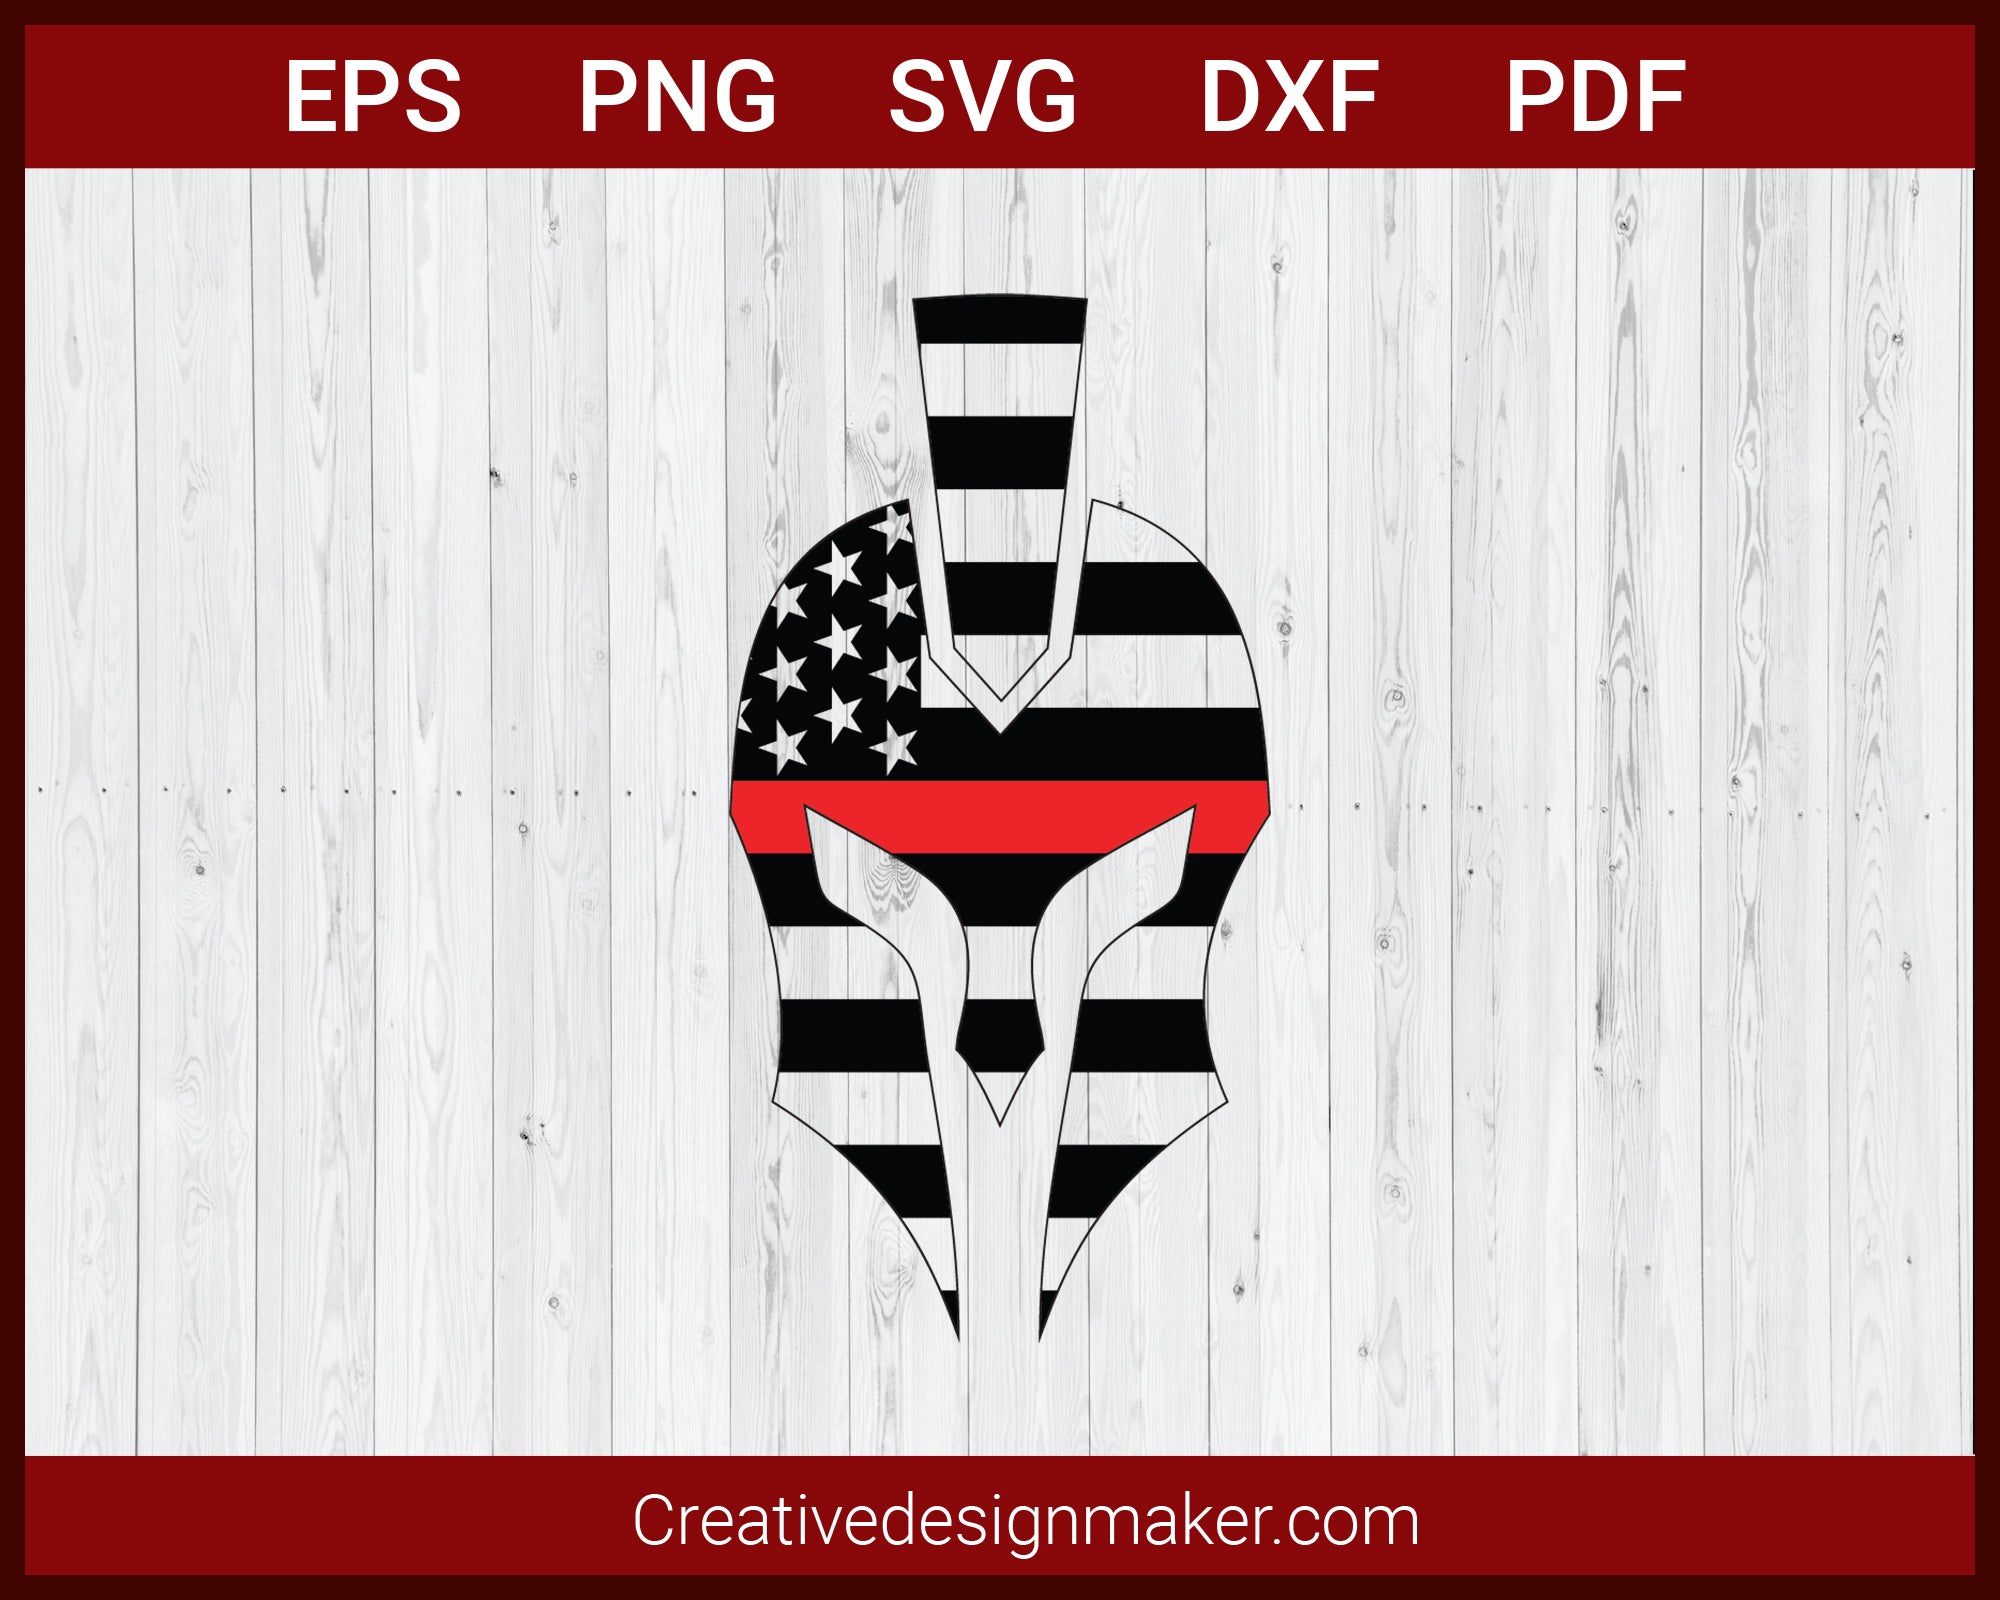 American Firefighter, Fireman SVG Cricut Silhouette DXF PNG EPS Cut File